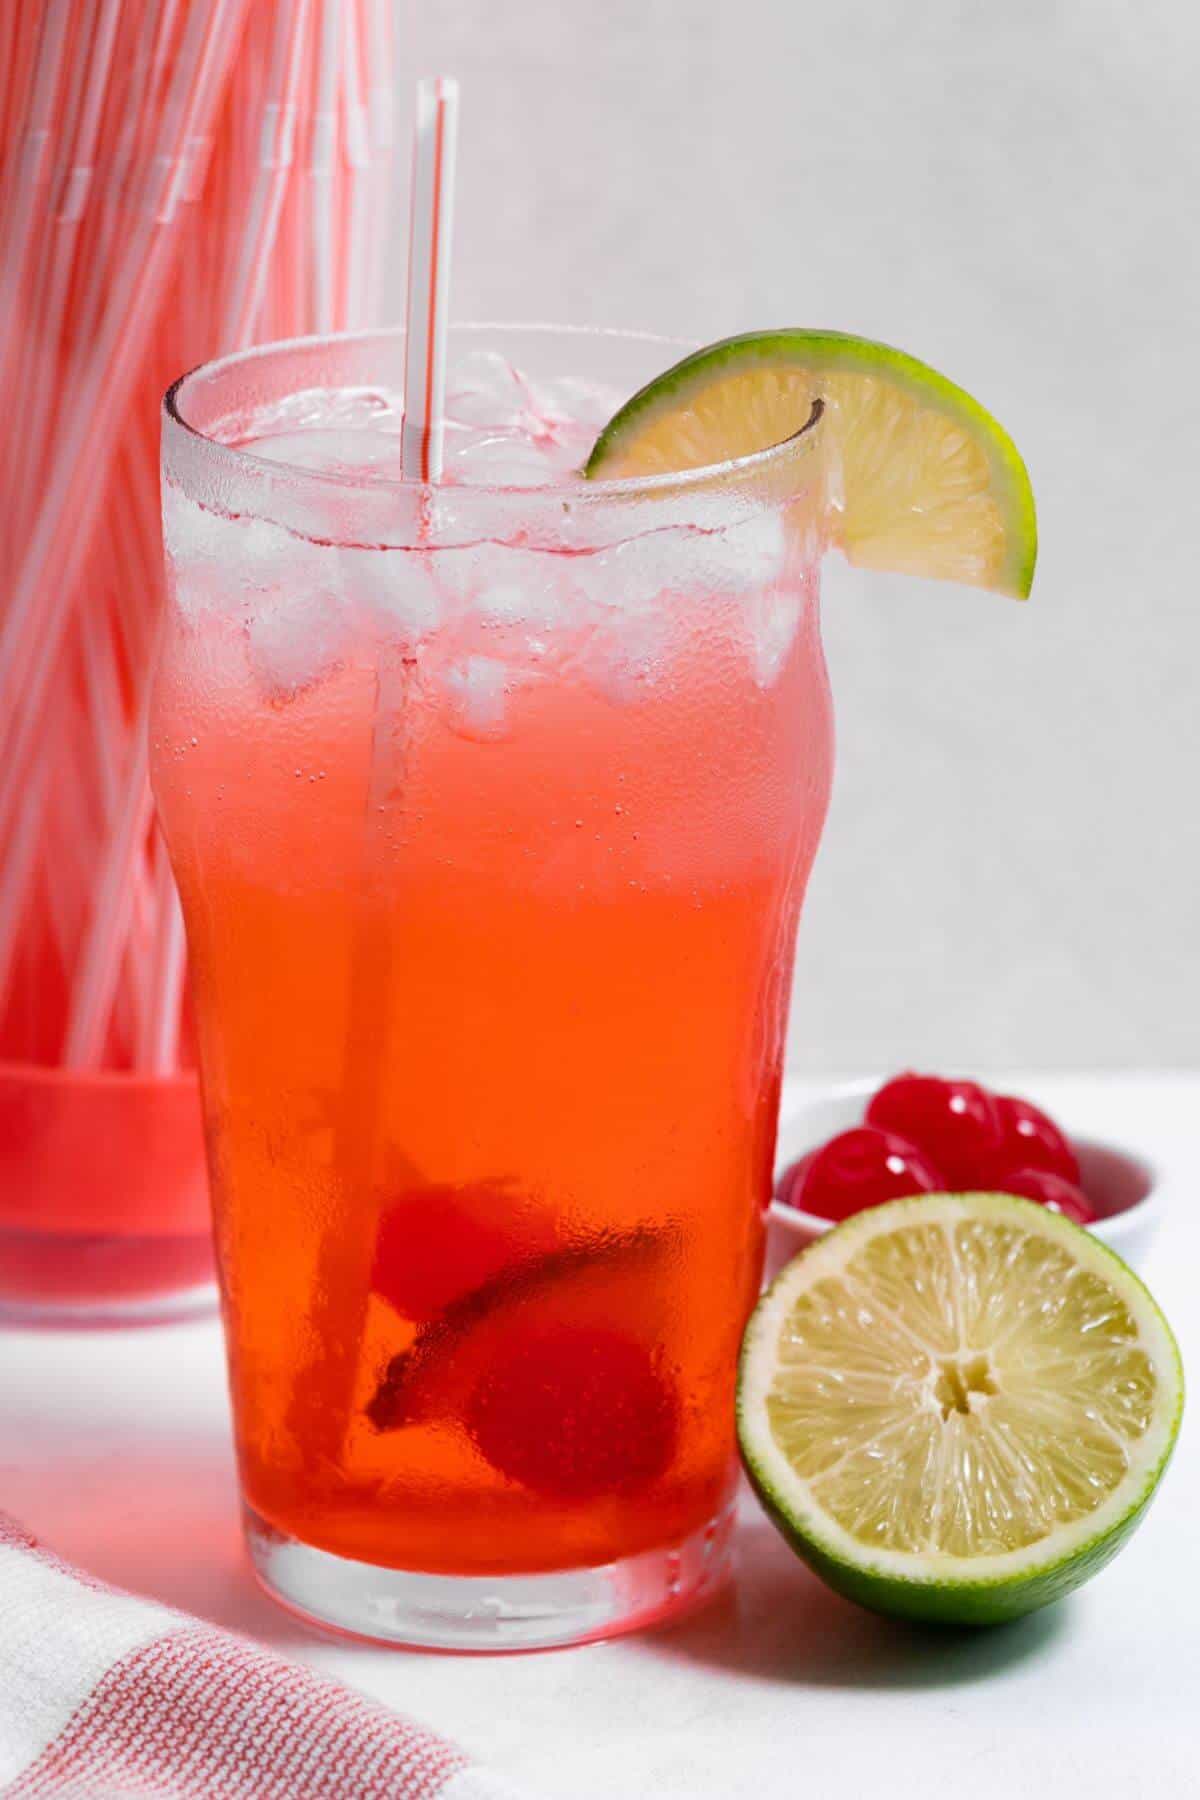 Side view of cherry limeade drink.